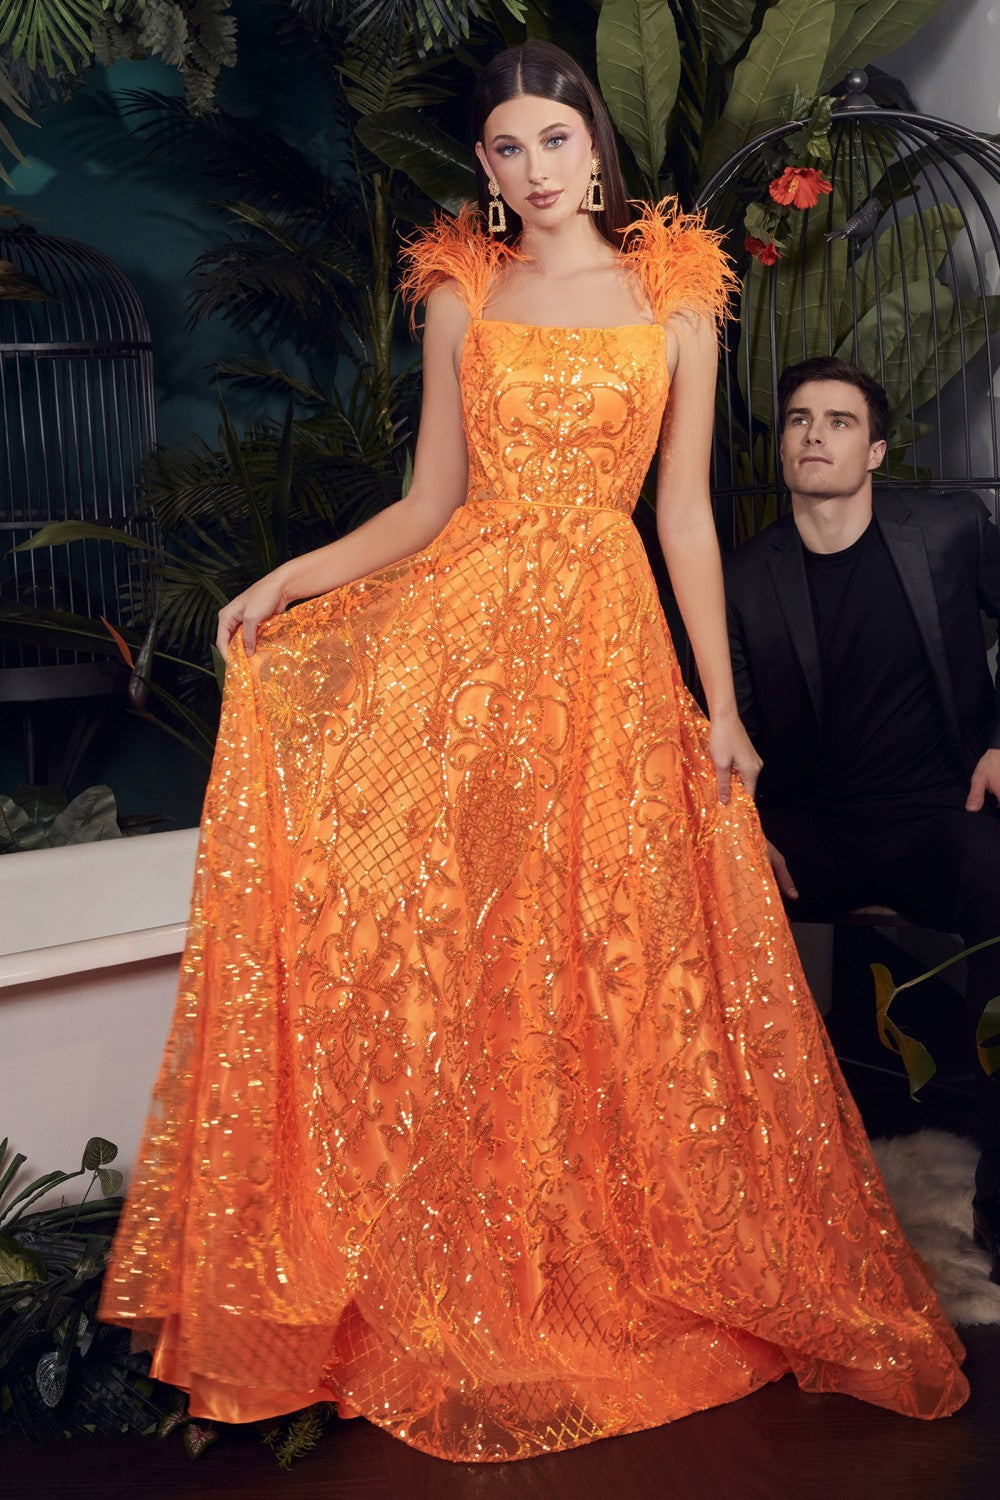 Neon Orange Ball Gown By Ladivine KV1076 - Women Evening Formal Gown - Special Occasion